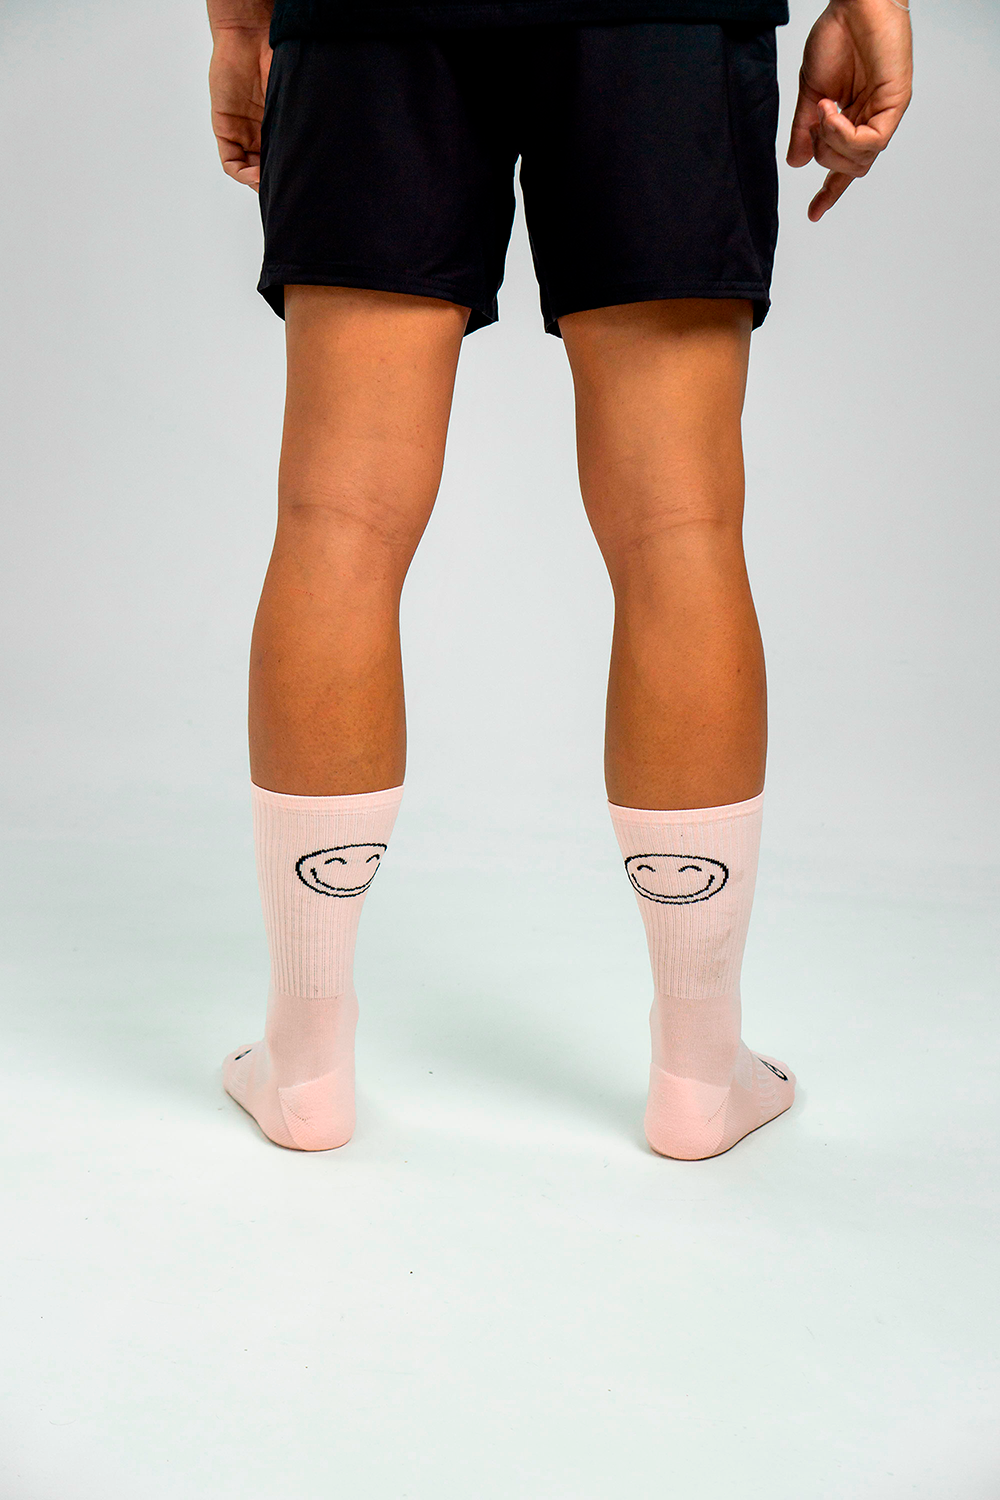 Calcetines Deportivos Happy Basics - Pack 5 uds